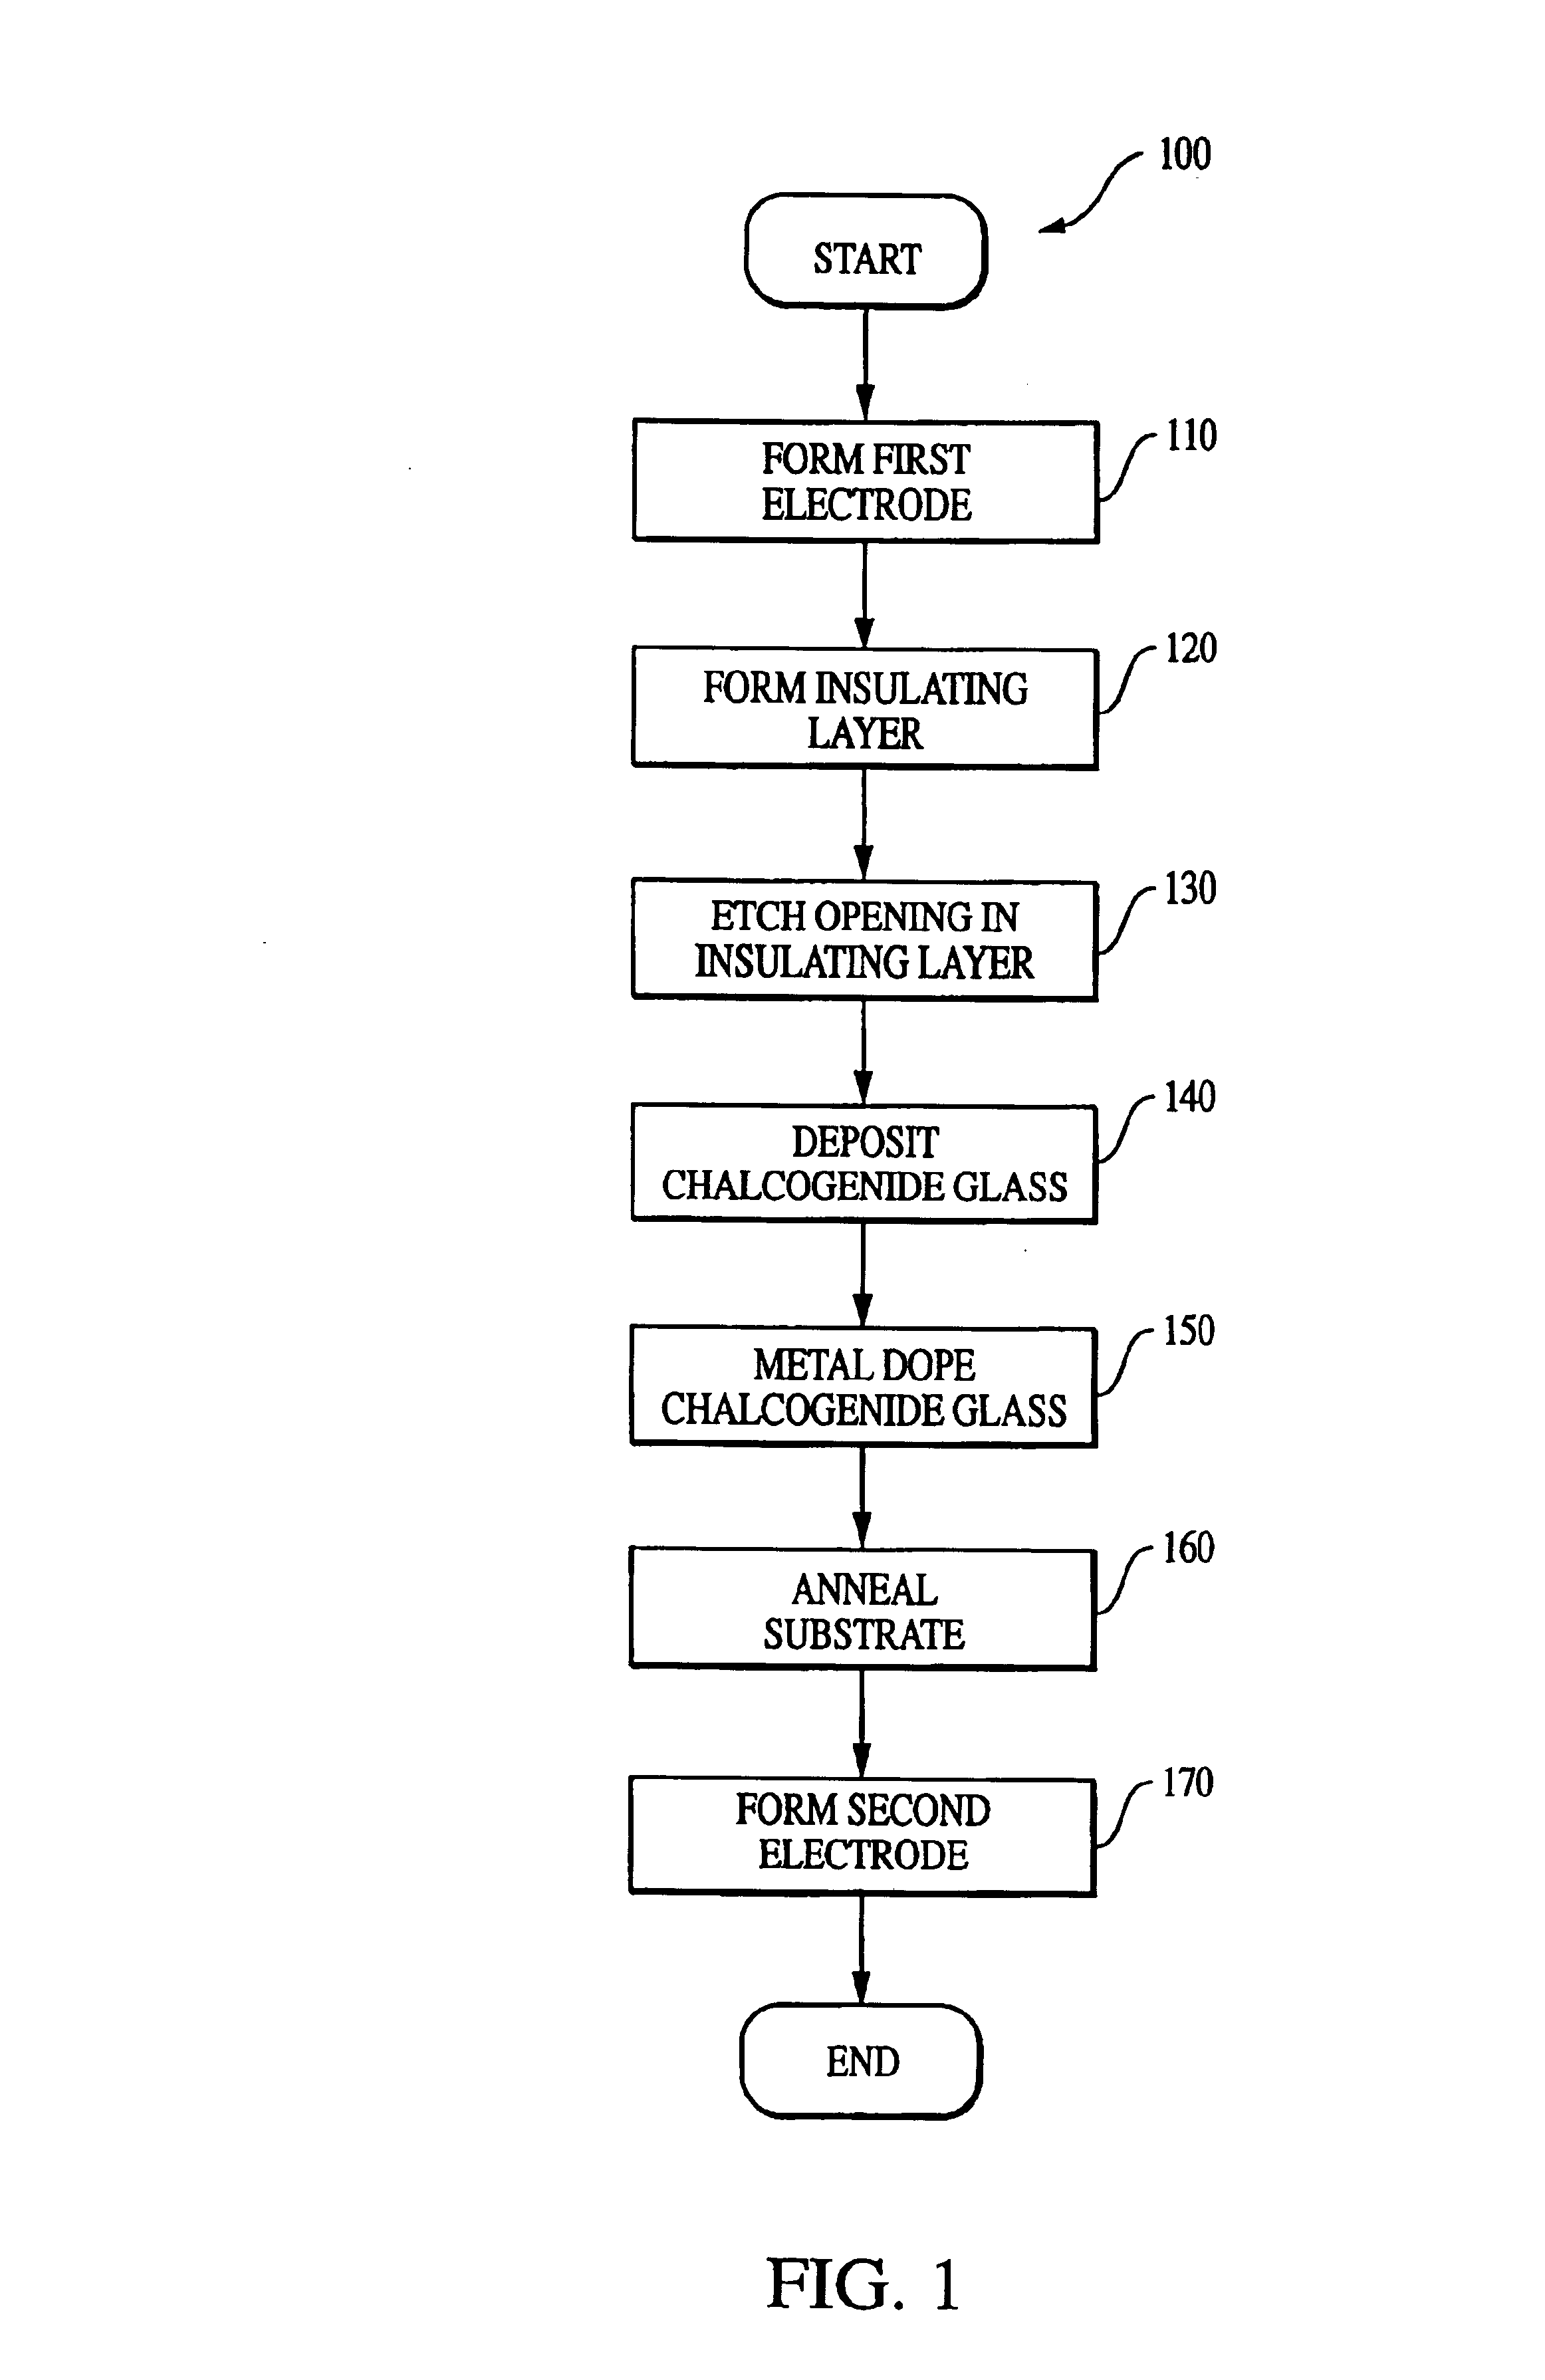 Method to alter chalcogenide glass for improved switching characteristics